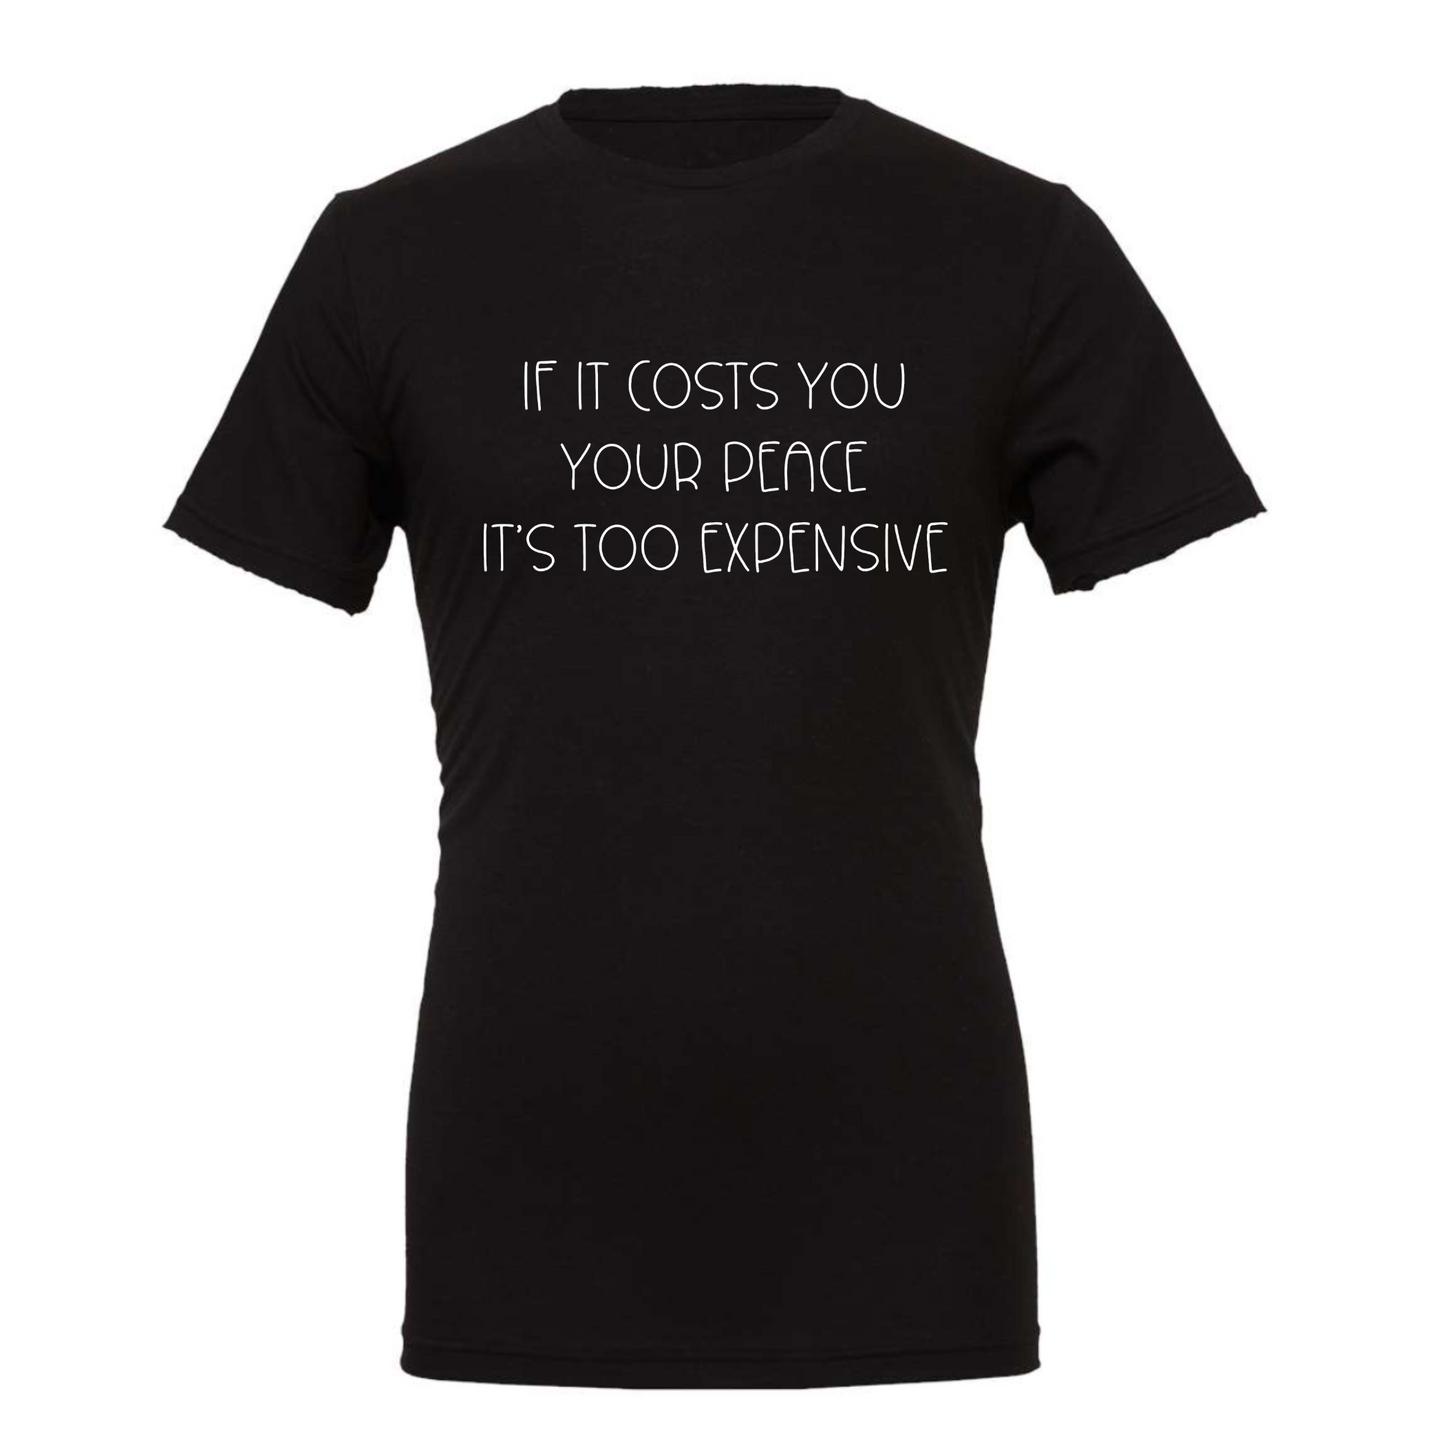 If It Costs You Your Peace It's Too Expensive T-Shirt in black with dainty white bold text. This is the front view of the shirt.